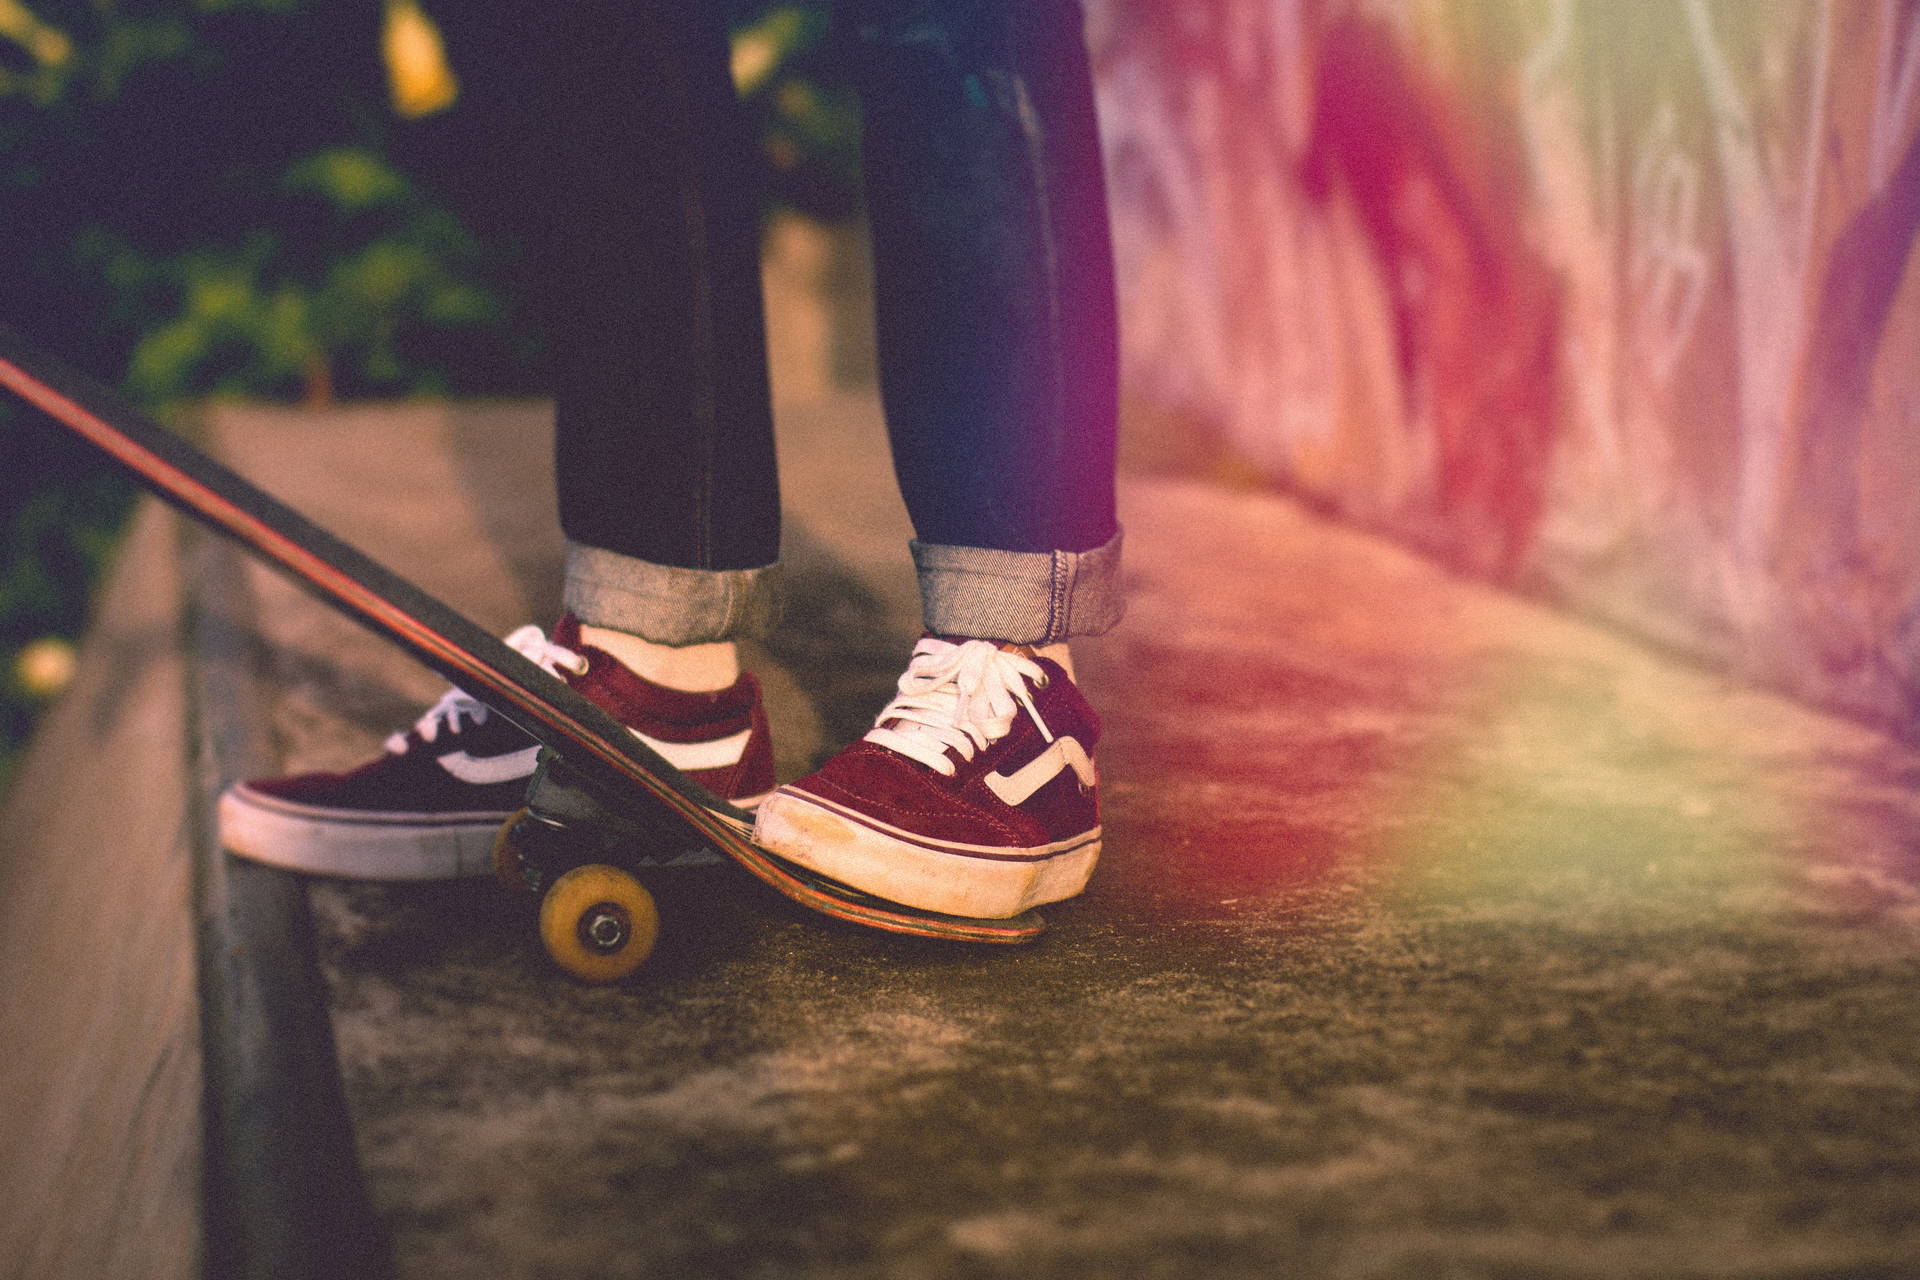 A person wearing Vans shoes is standing on a skateboard. - Vans